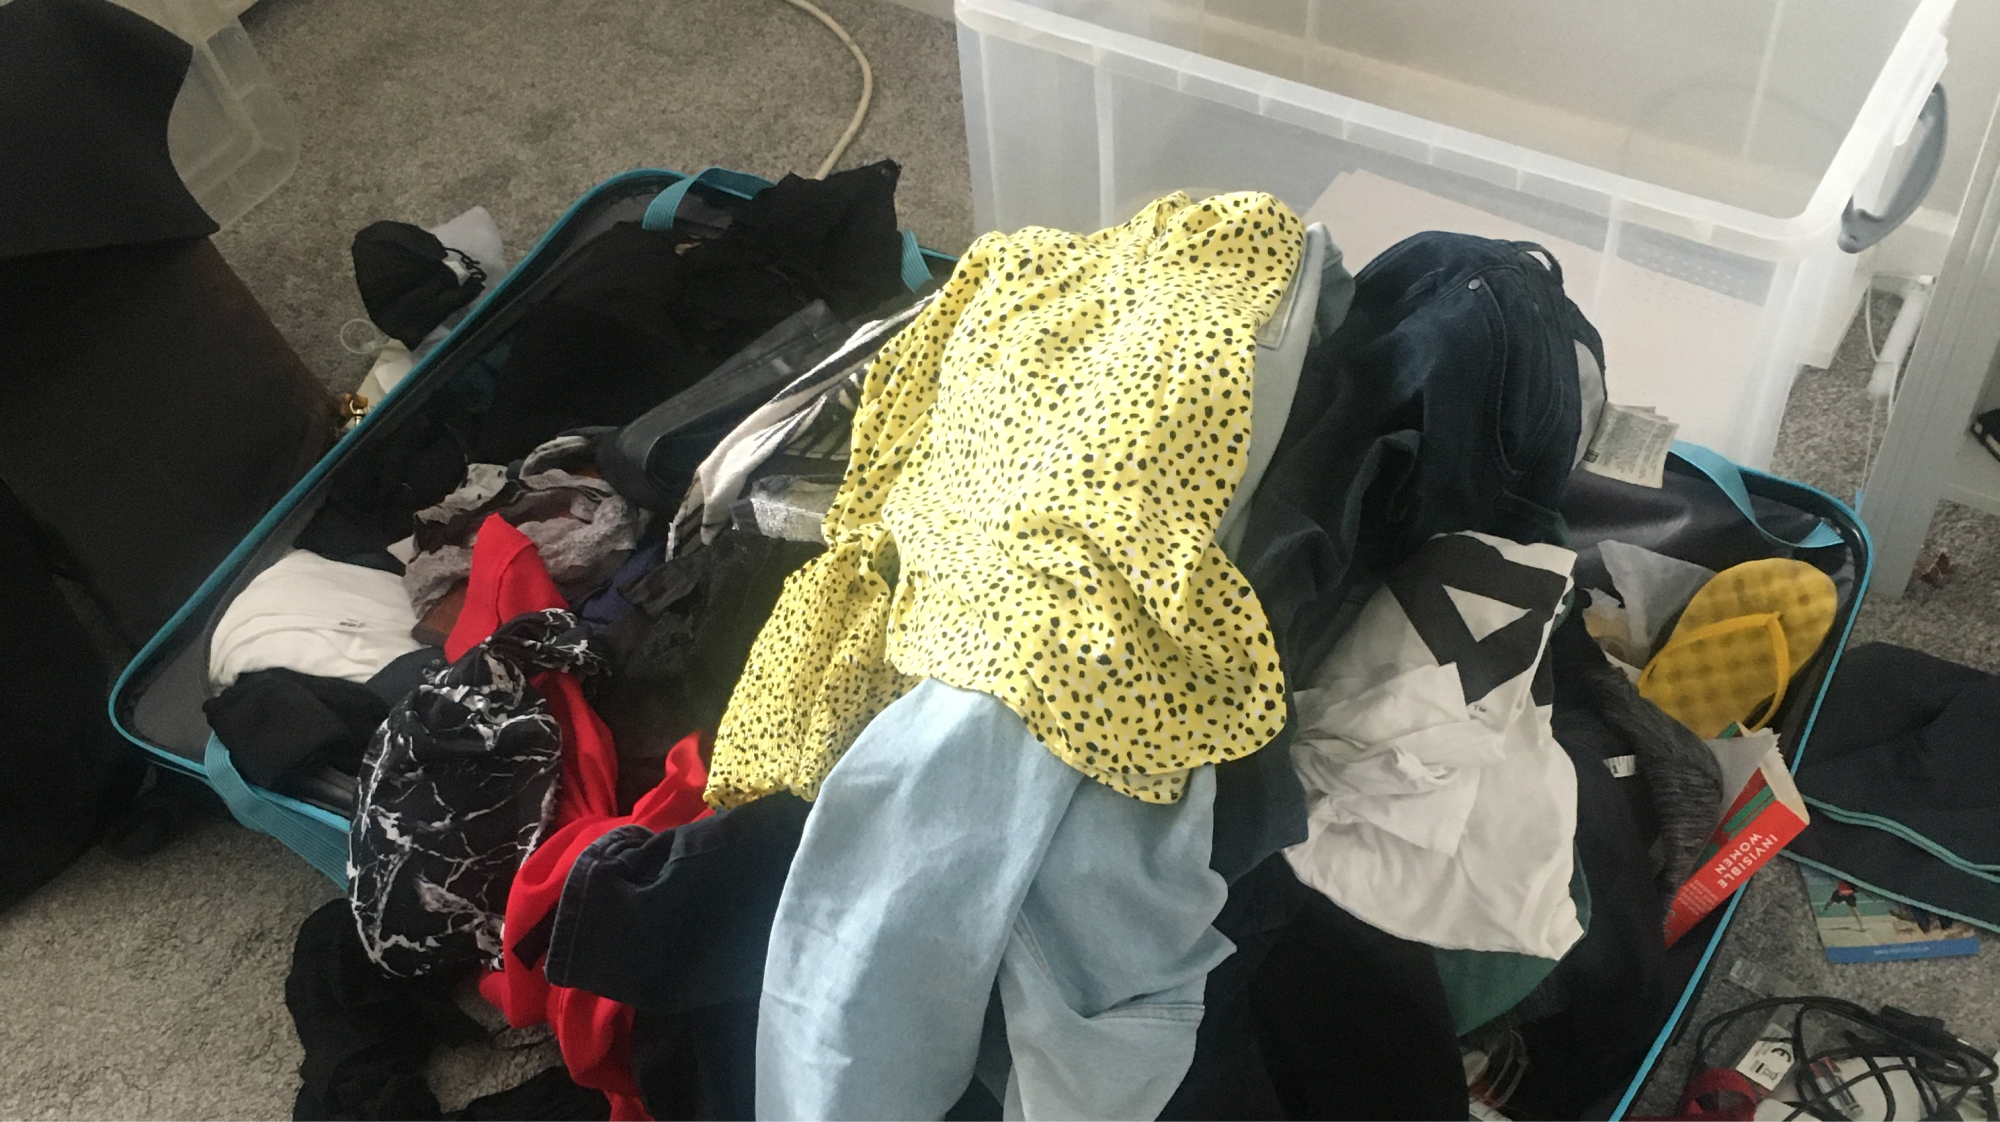 A messy suitcase filled with clothes in a messy room